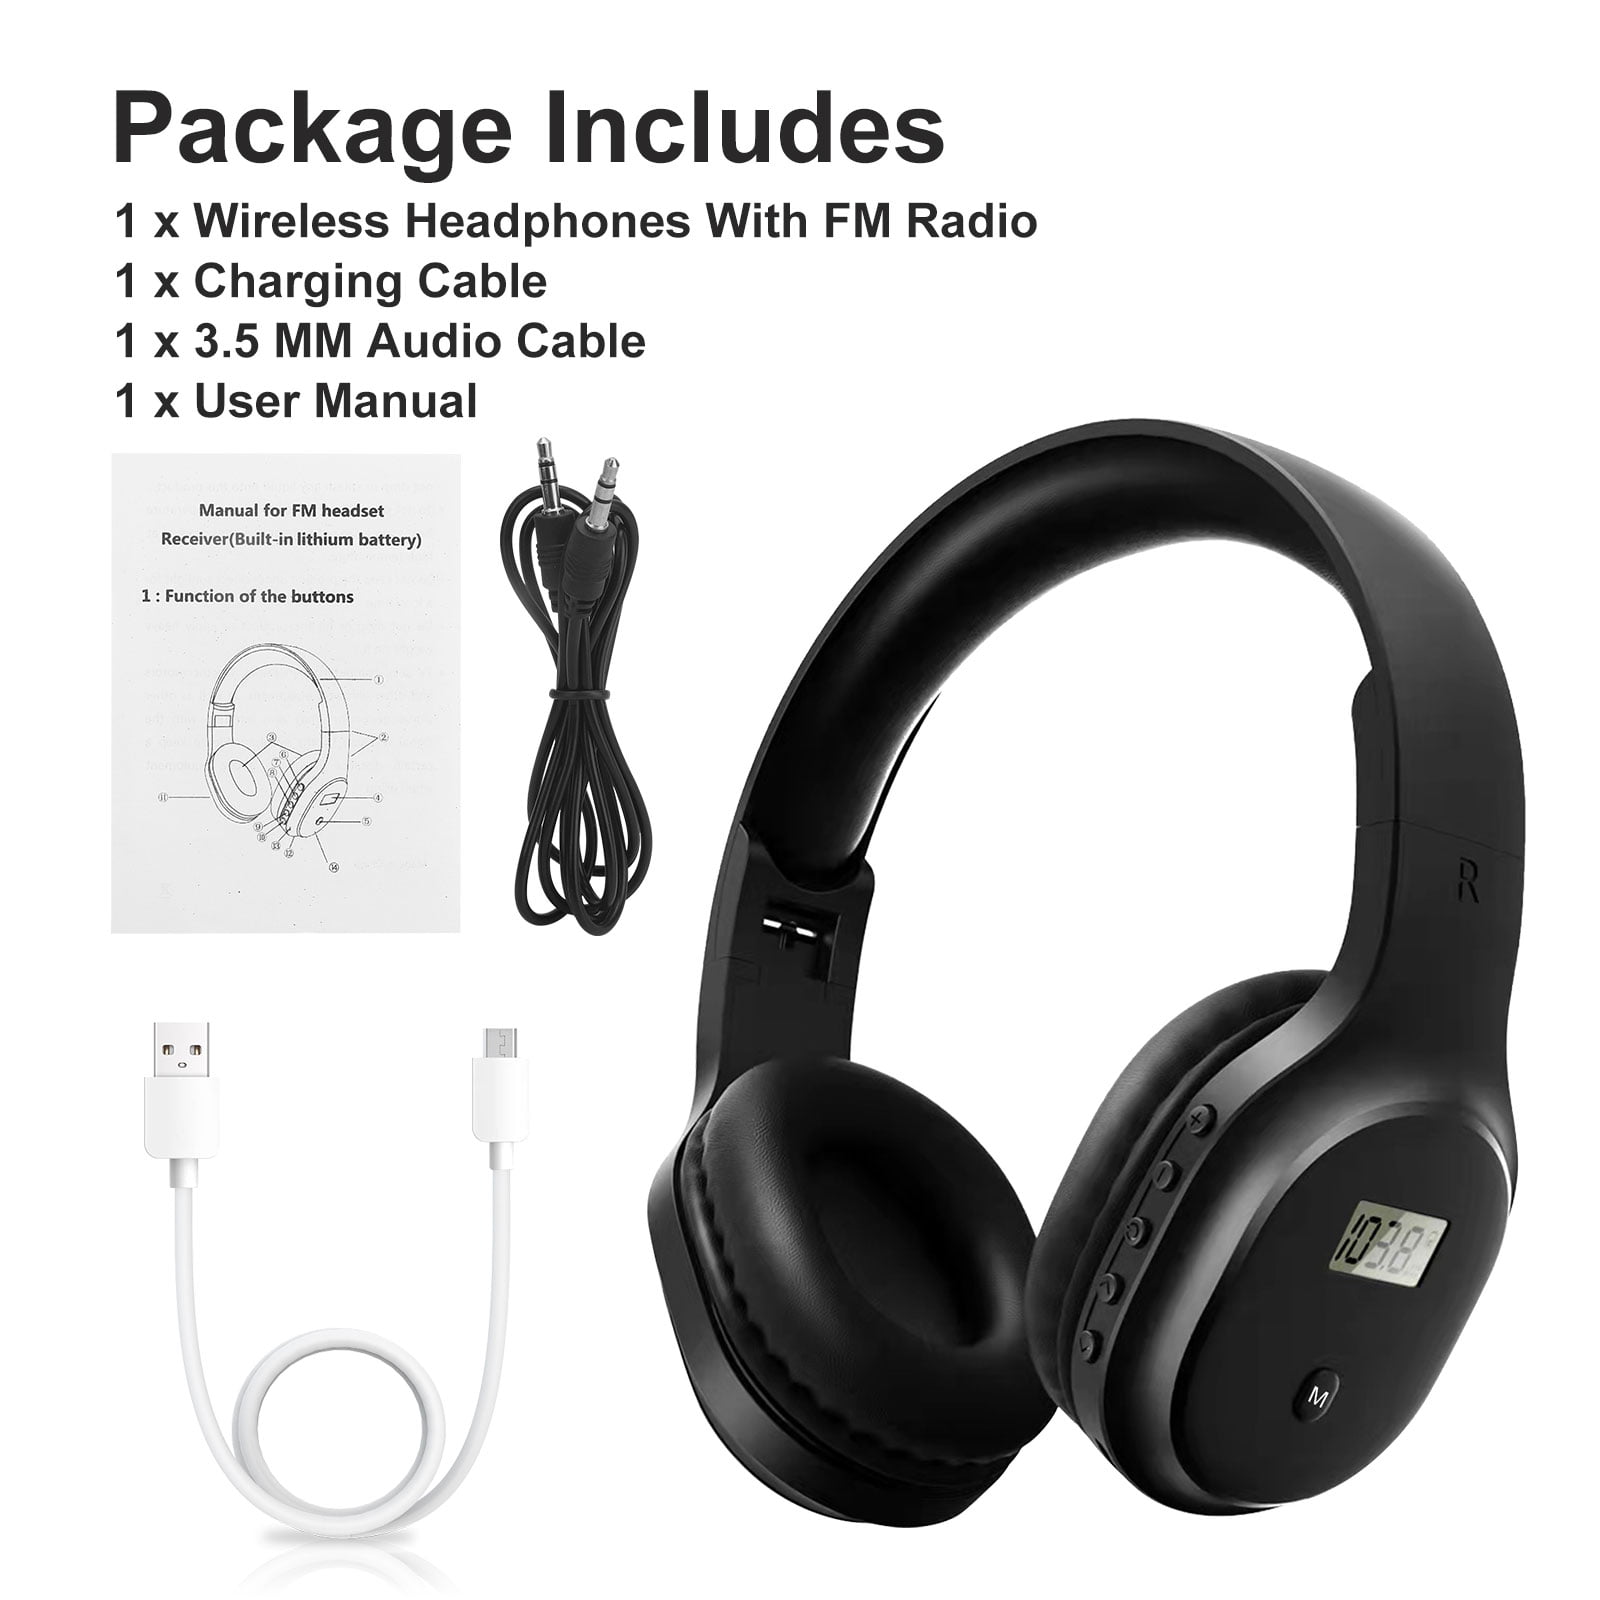 mestre vi binde Portable Personal FM Radio Headphones for Mowing with Best Reception, TSV Wireless  FM Headset Ear Muffs with Built-in Radio for Jogging, Walking, Daily Works,  Supports External AUX cable - Walmart.com